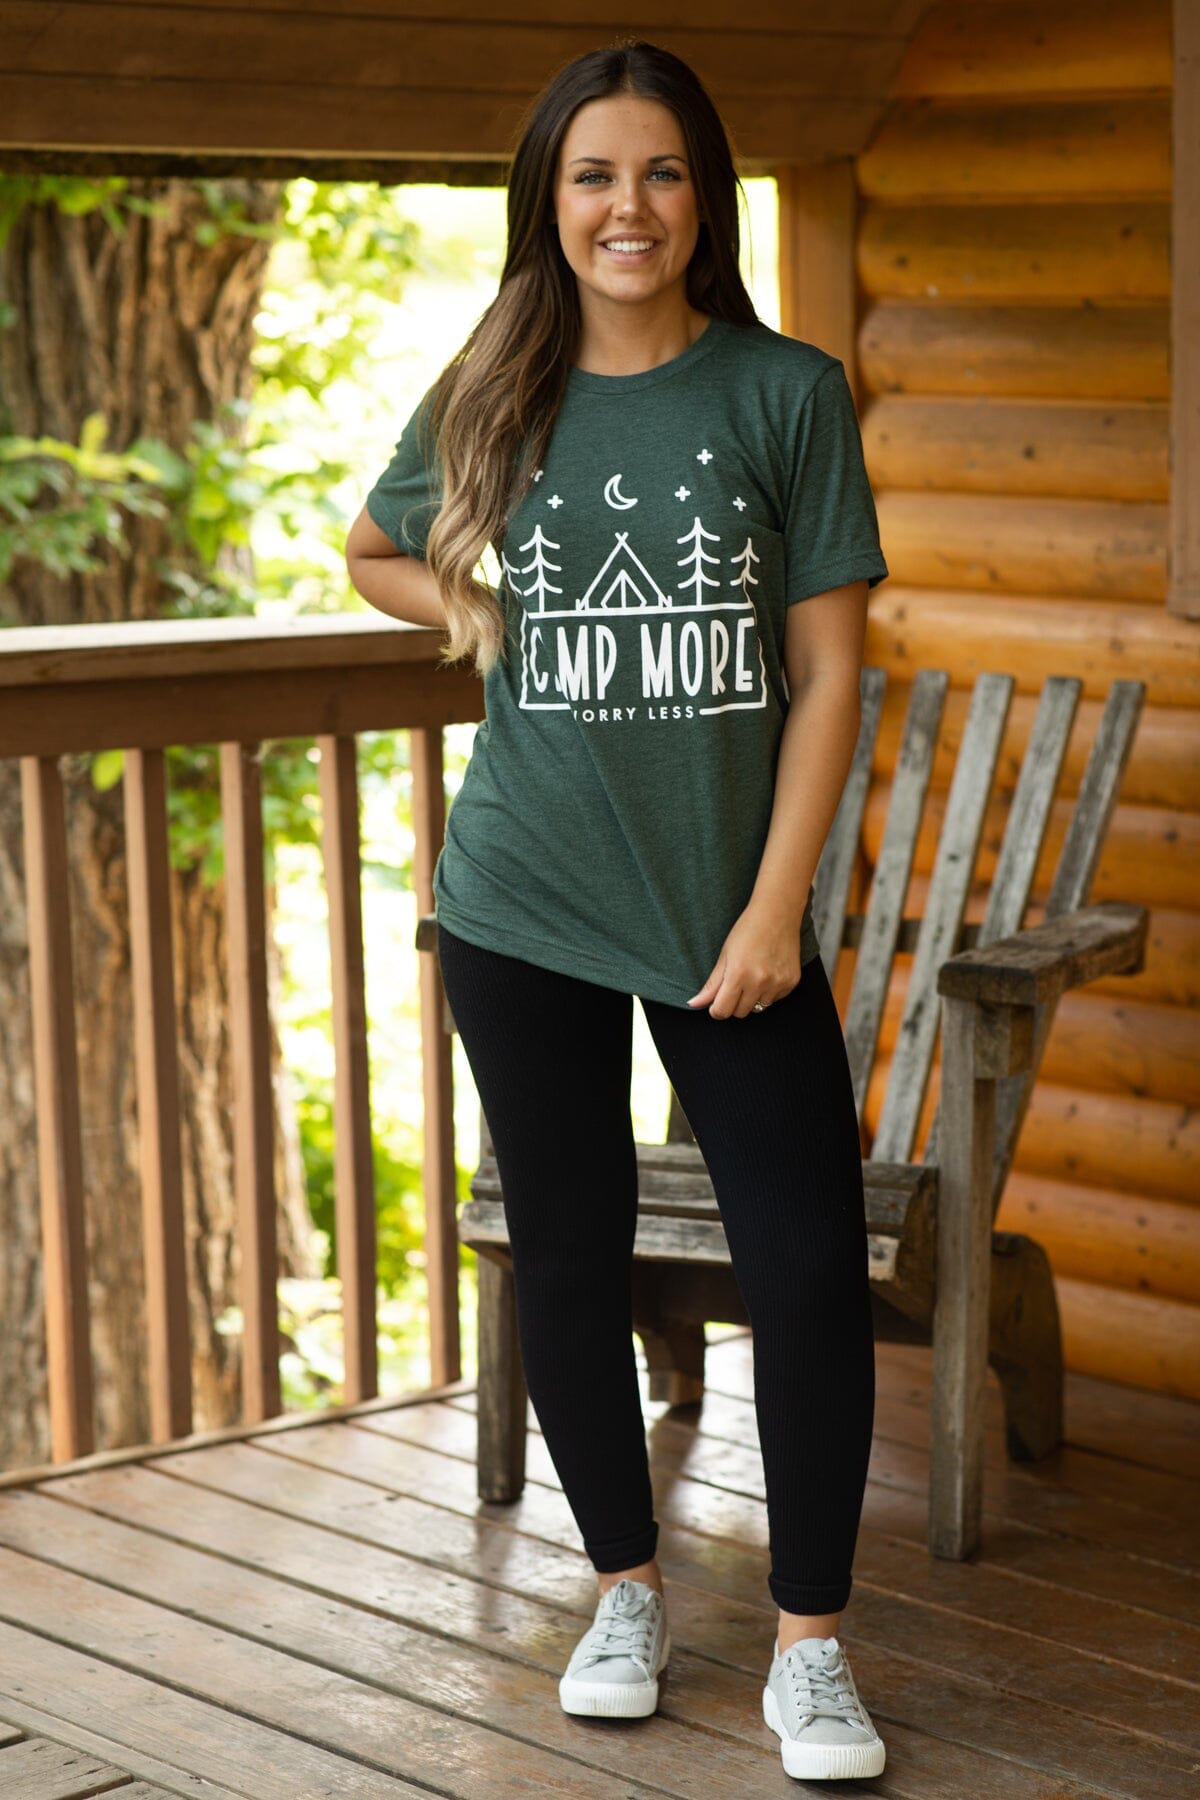 Hunter Green Camp More Worry Less Graphic Tee - Filly Flair